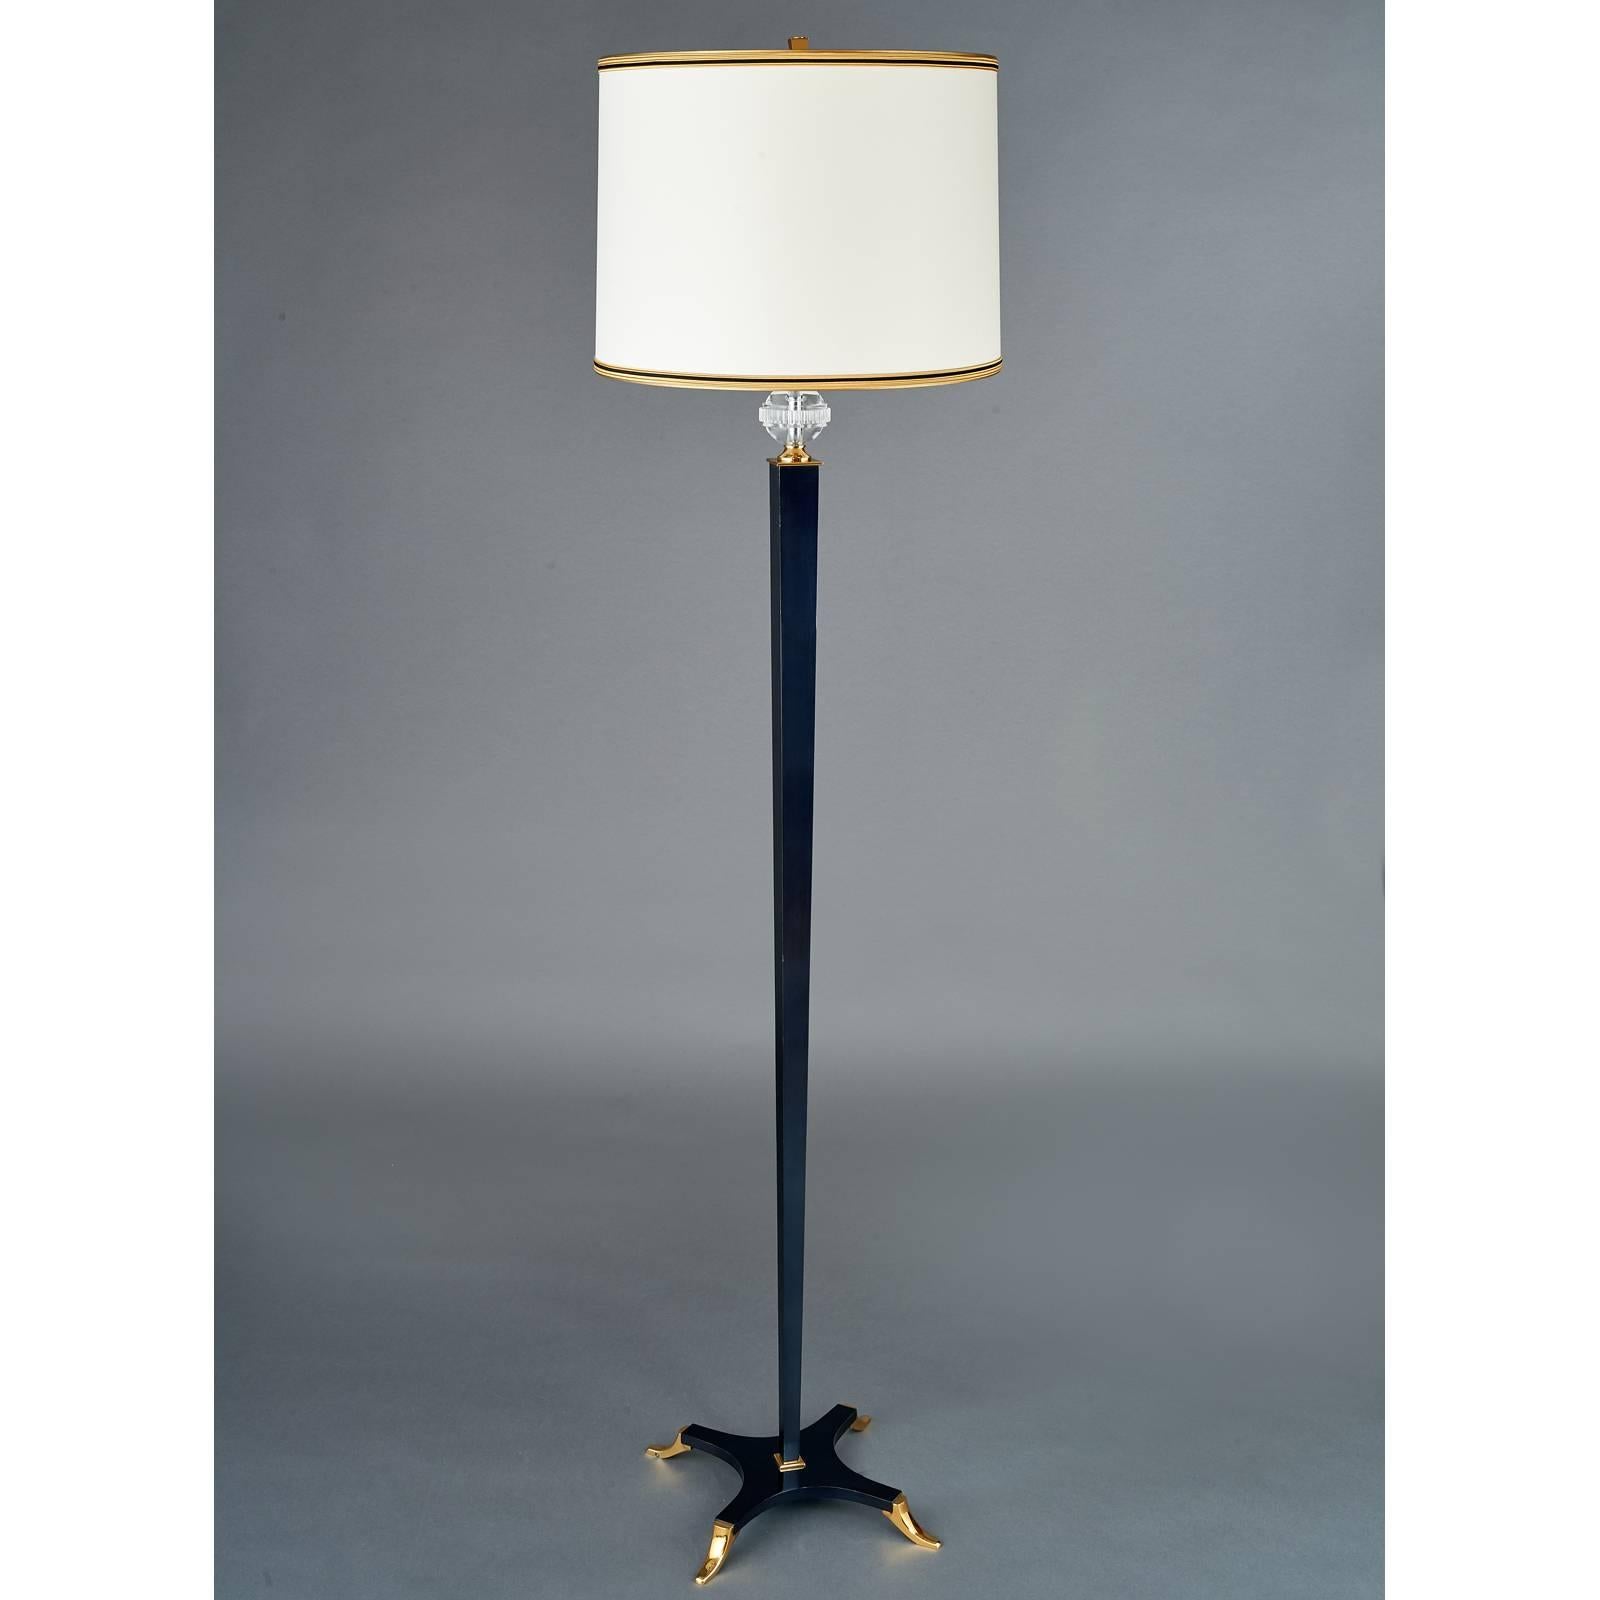 DOMINIQUE
Andre Domin (1883-1962) and Marcel Genevriere (1885-1967)
Exceptional neoclassical floor lamp in gunmetal and gilt bronze with sharply tapered shaft and belted perspex globe ornament, France, 1950s 
Dimensions: 69 H x 17 diameter. Rewired